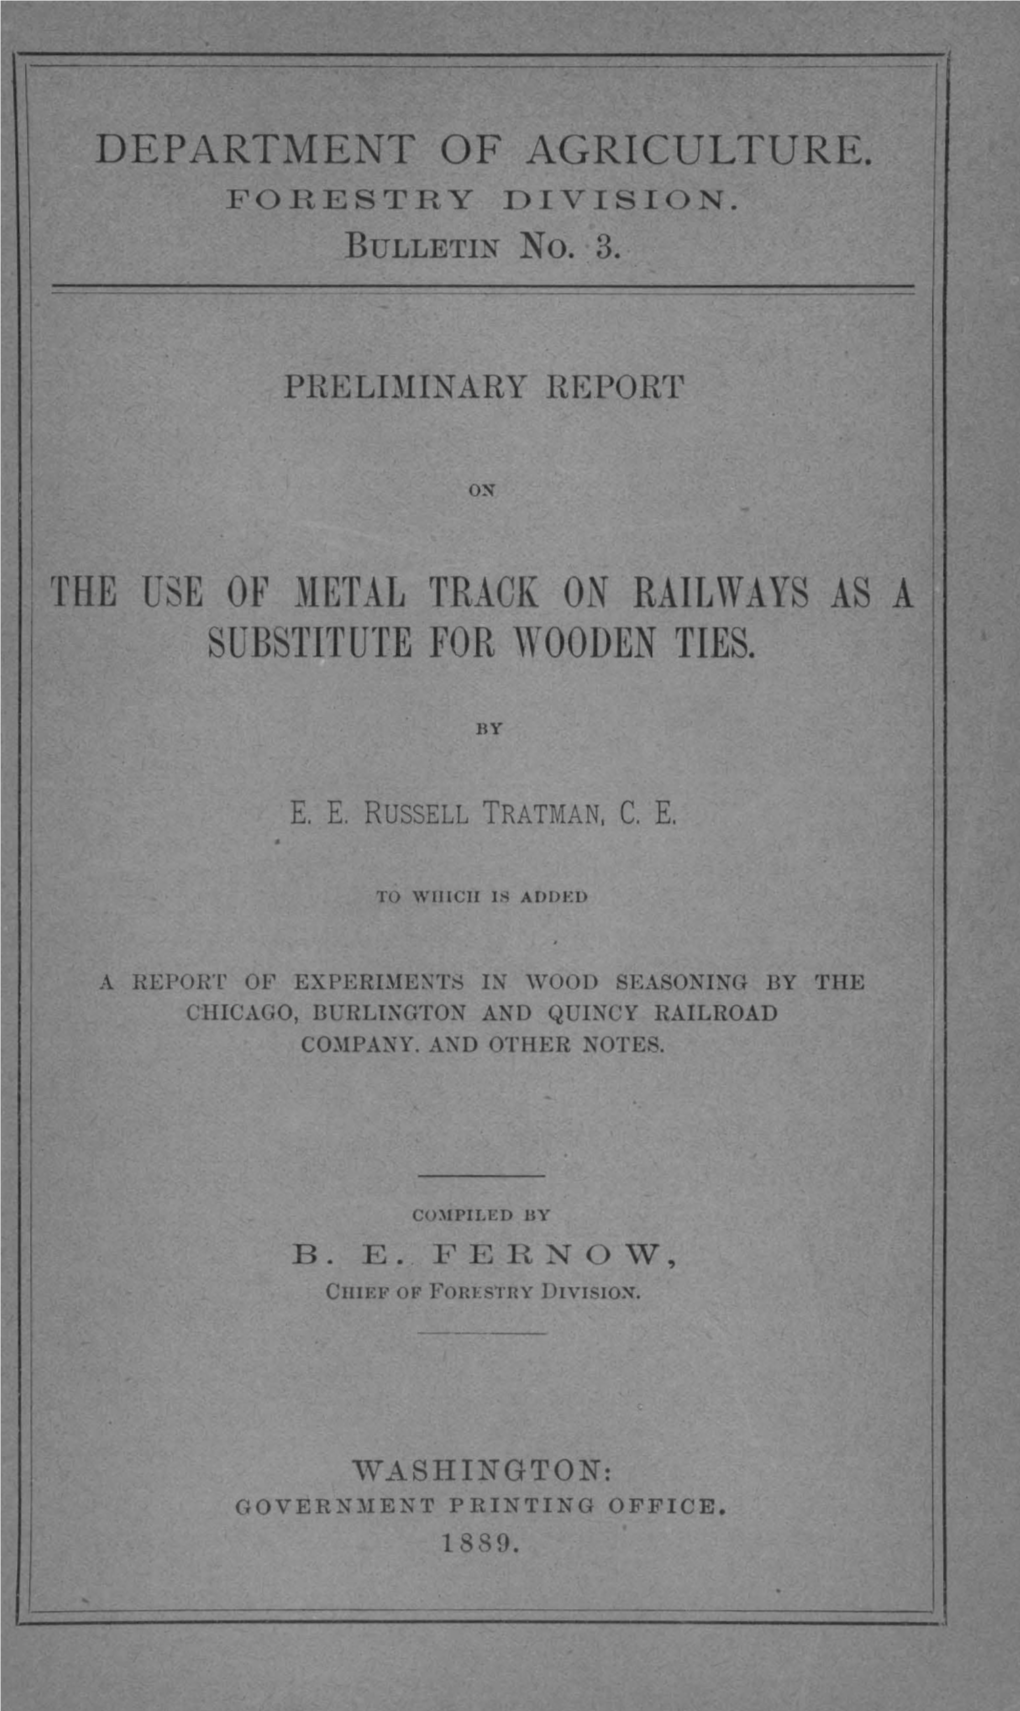 The Use of 3Ietal Track on Railways As a Substitute for Wooden Ties